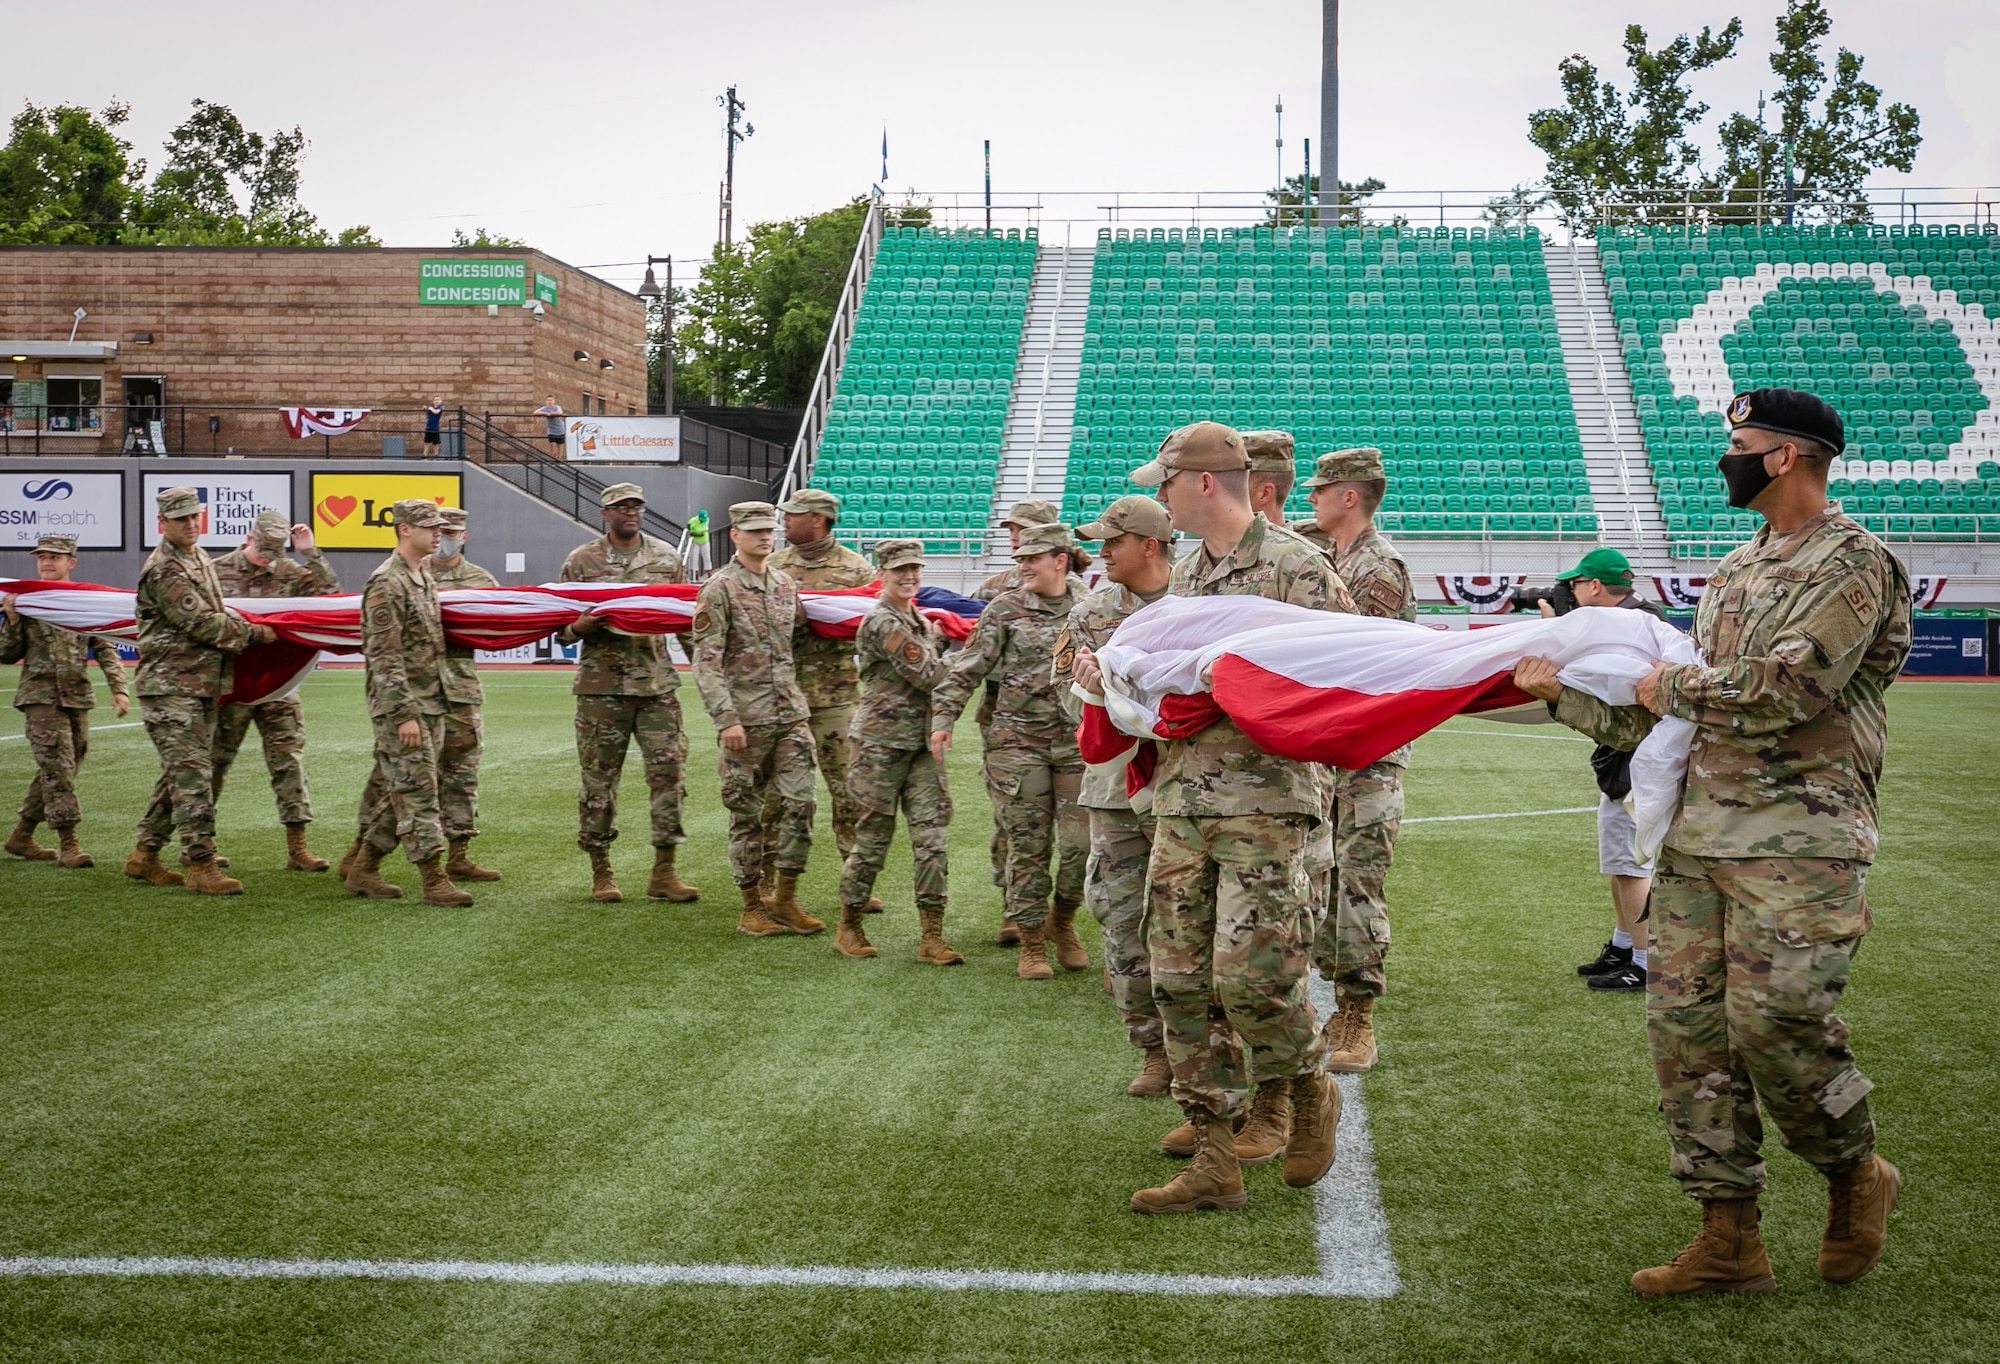 Airmen carry out large U.S. flag on soccer field.